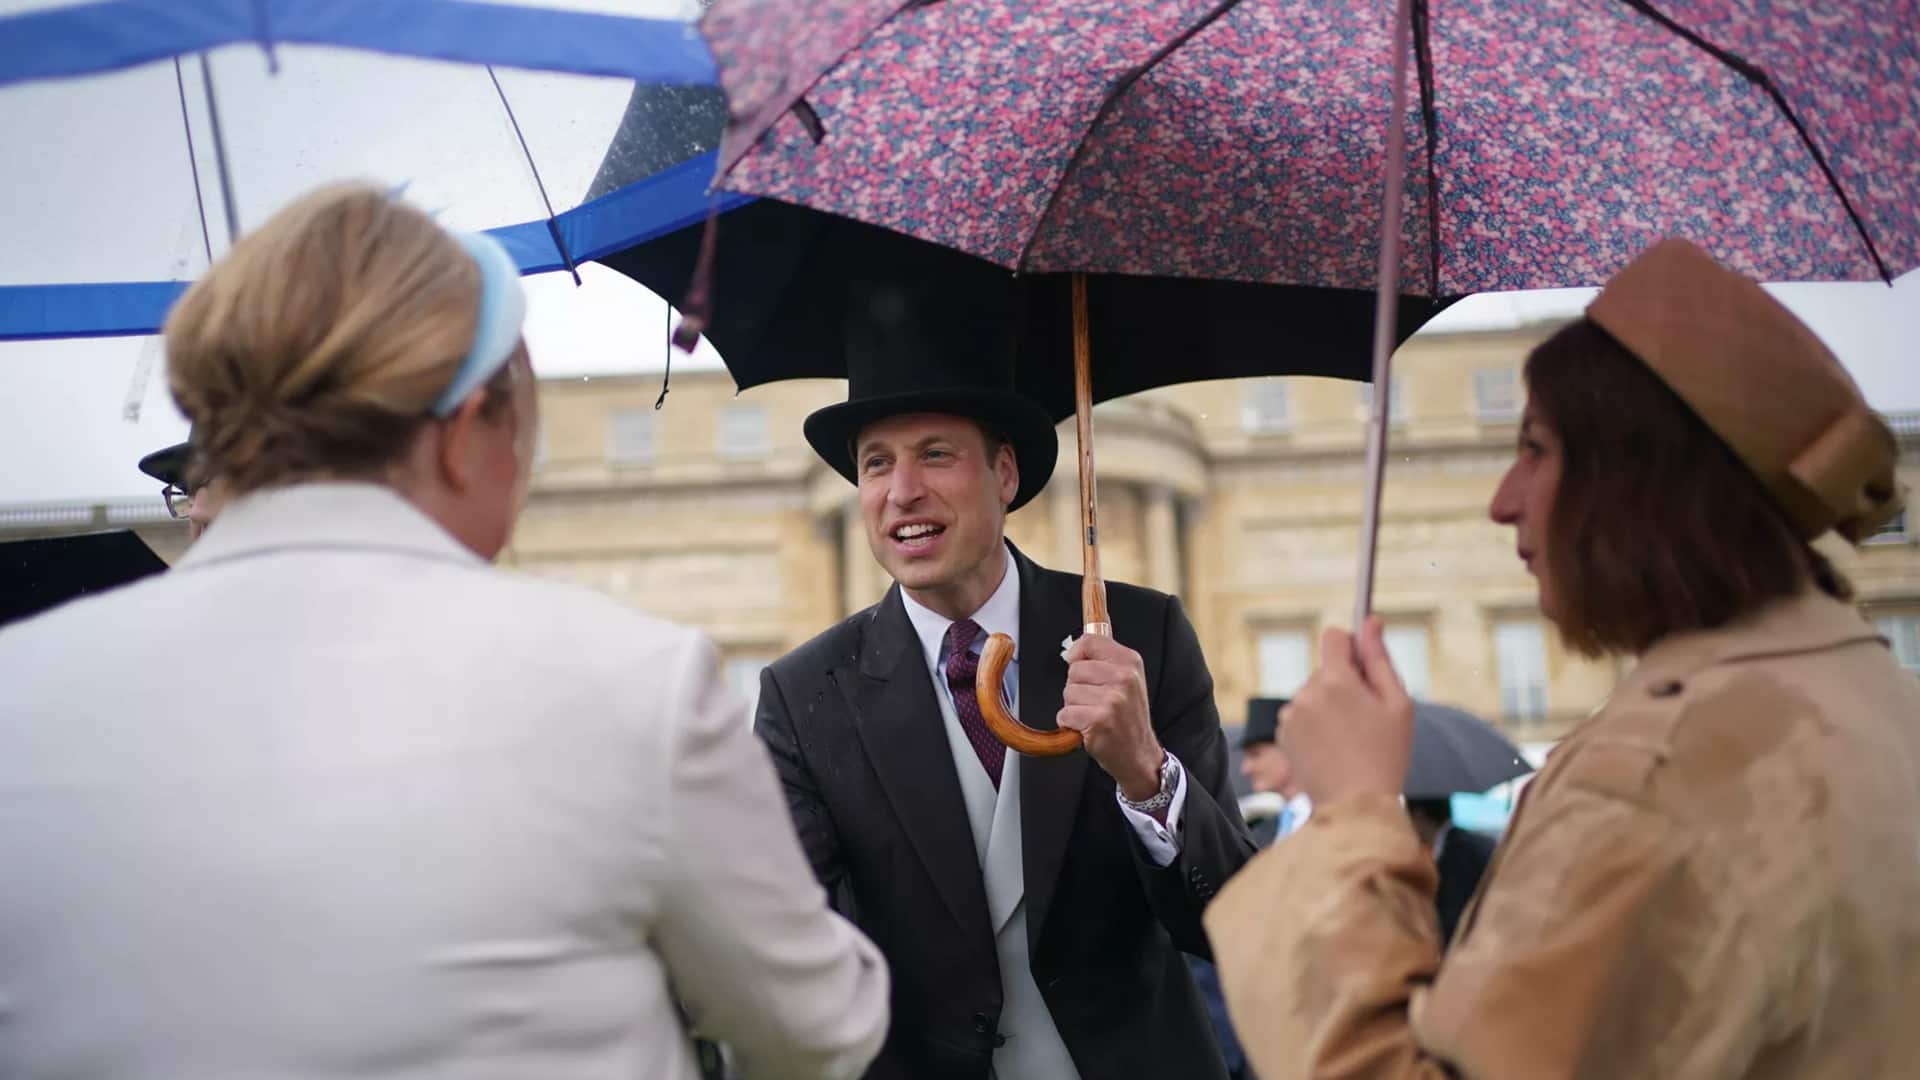 Royal cousins join Prince William at 'rainy' Buckingham Palace party